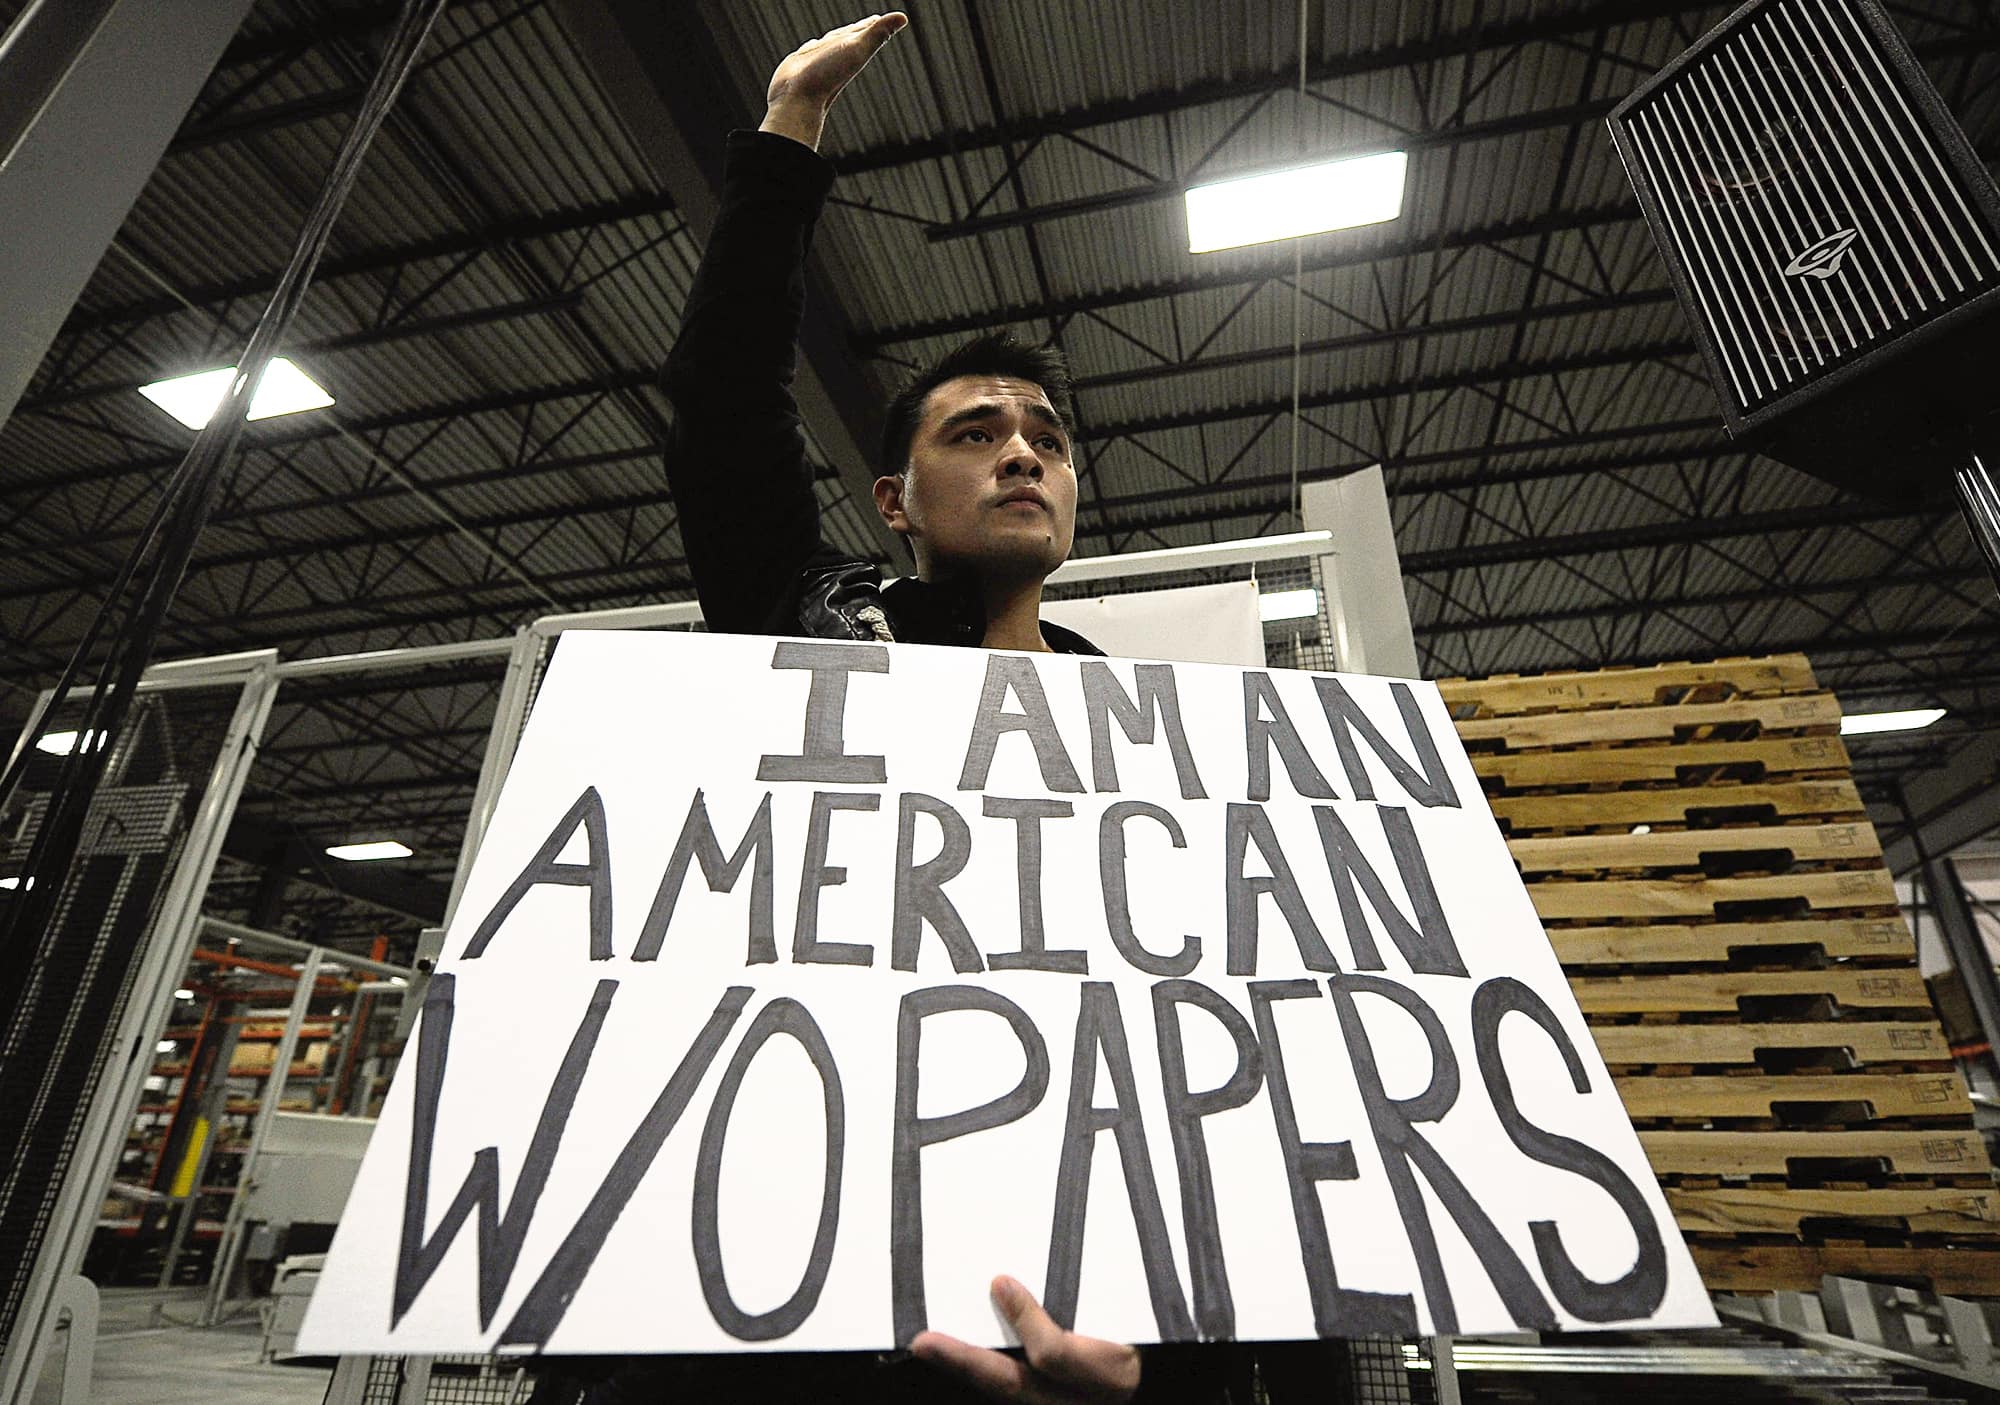 Jose Antonio Vargas holding a protest sign saying 'I am an American w/o papers' and raising his hand.